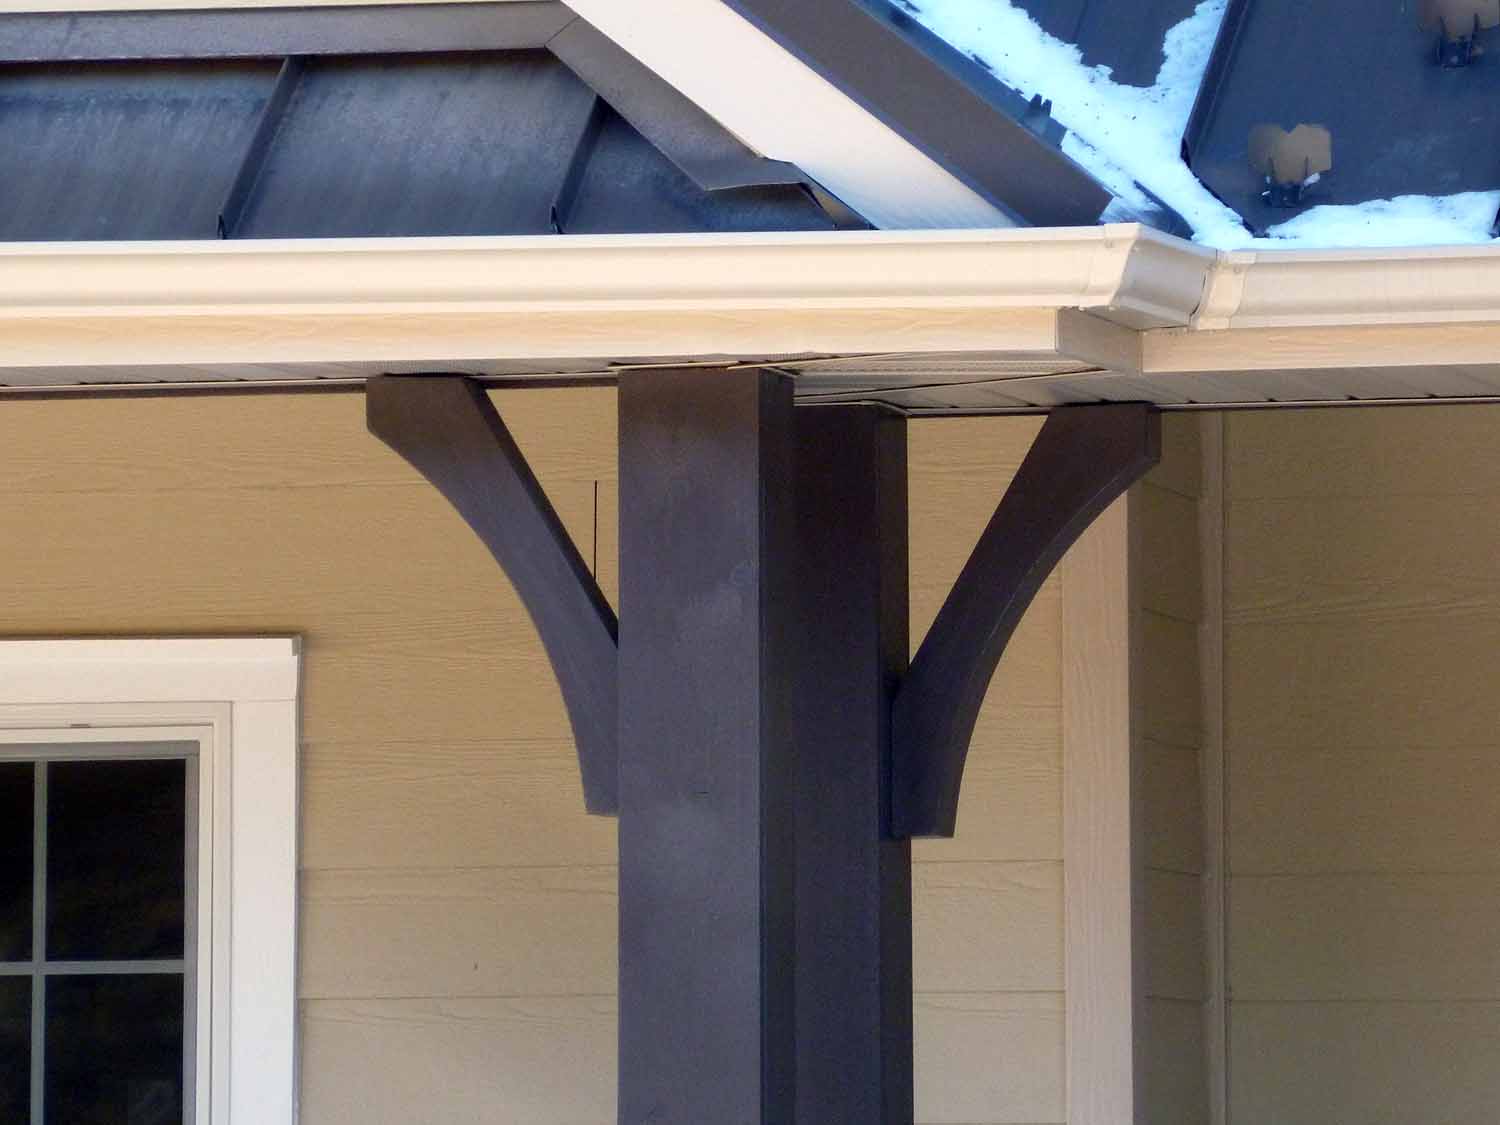 Porch post bracket made of painted wood